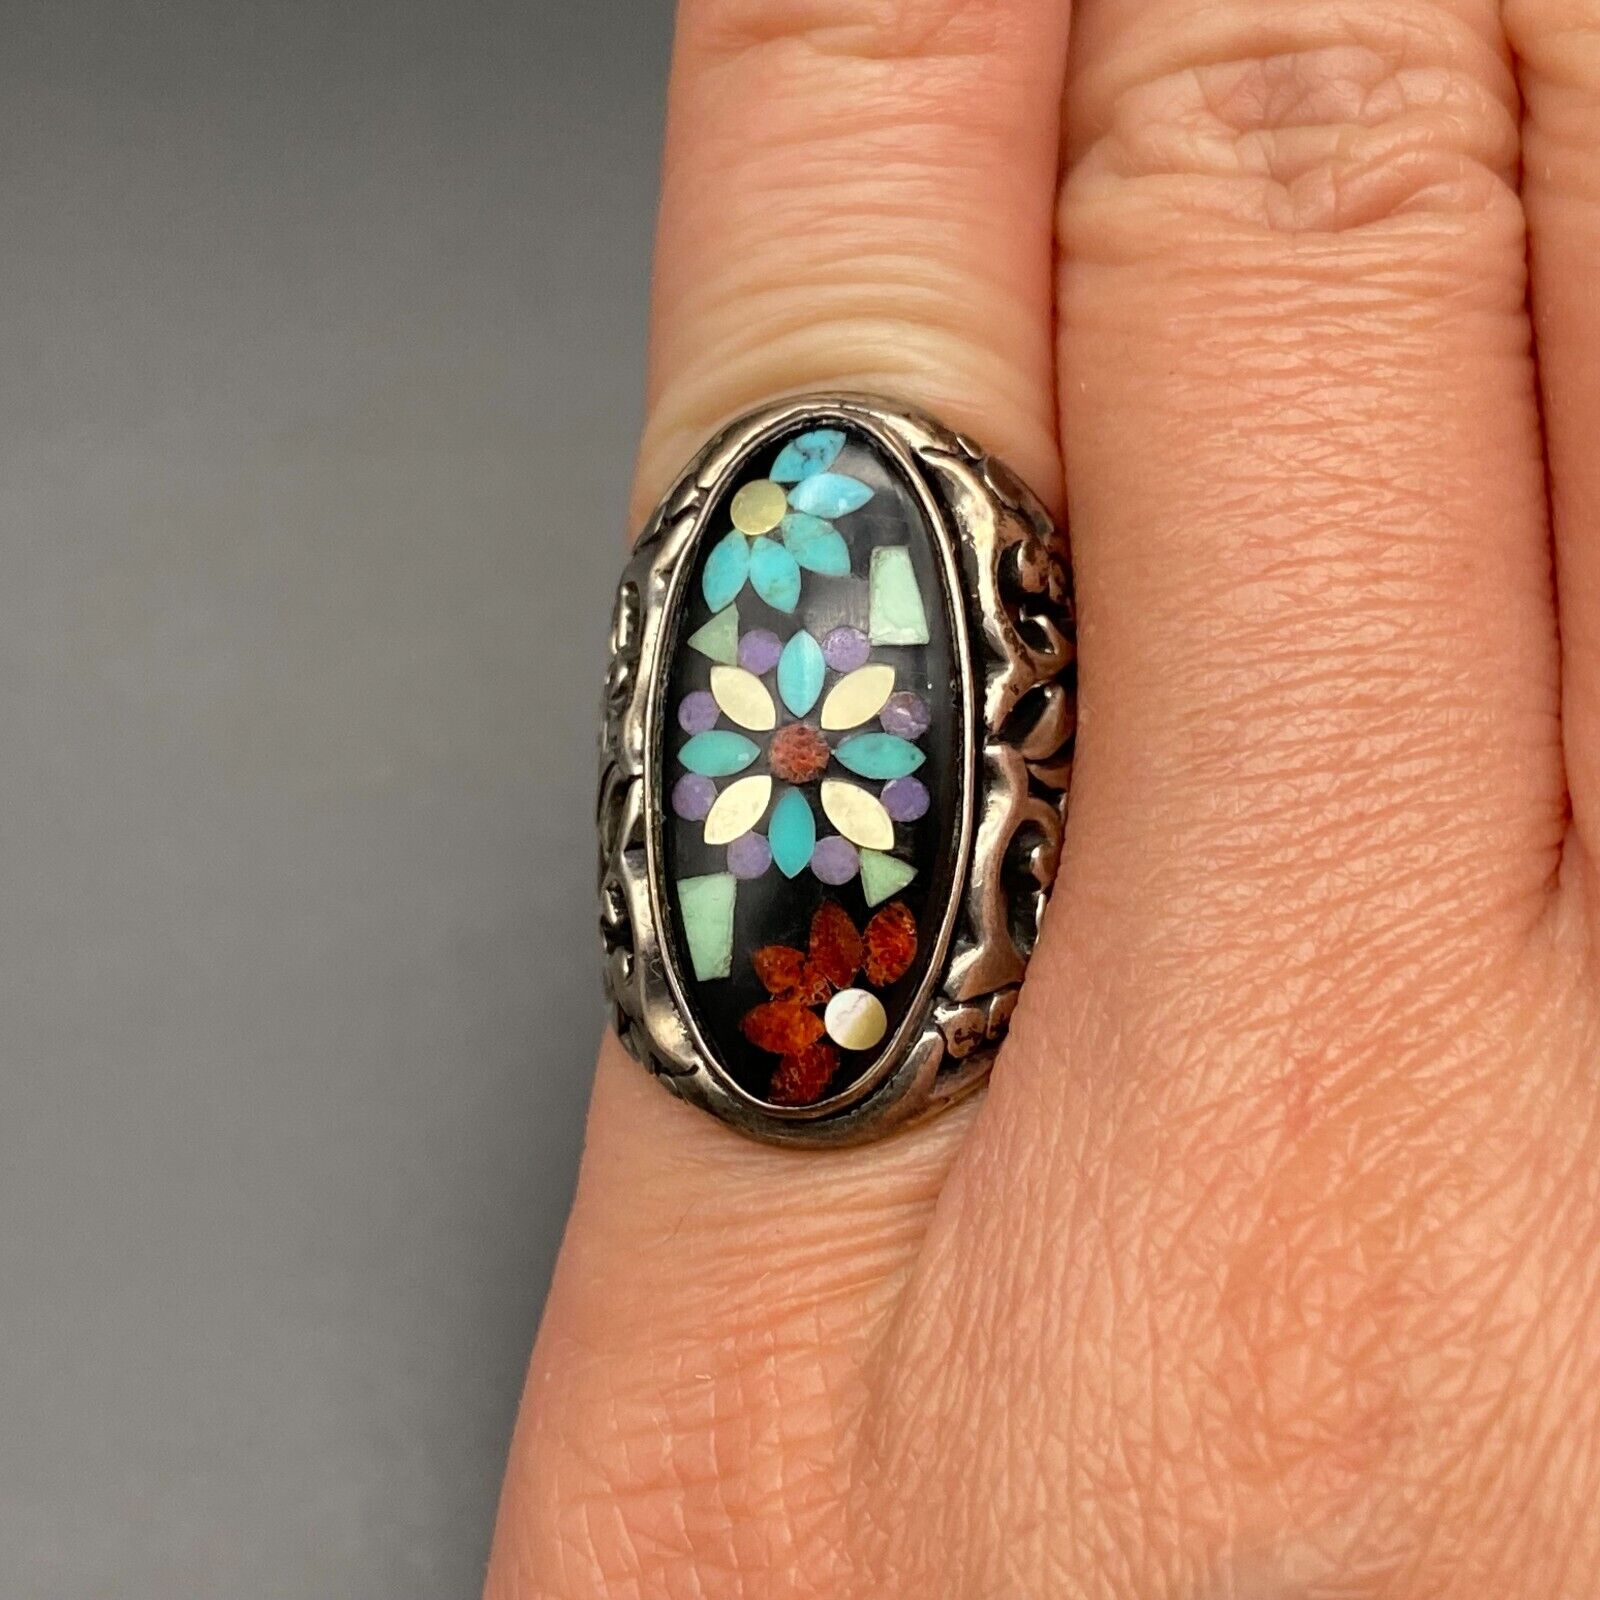 Vintage Southwestern Carolyn Pollack Anglo Flower Sterling Silver Ring Size 4.25